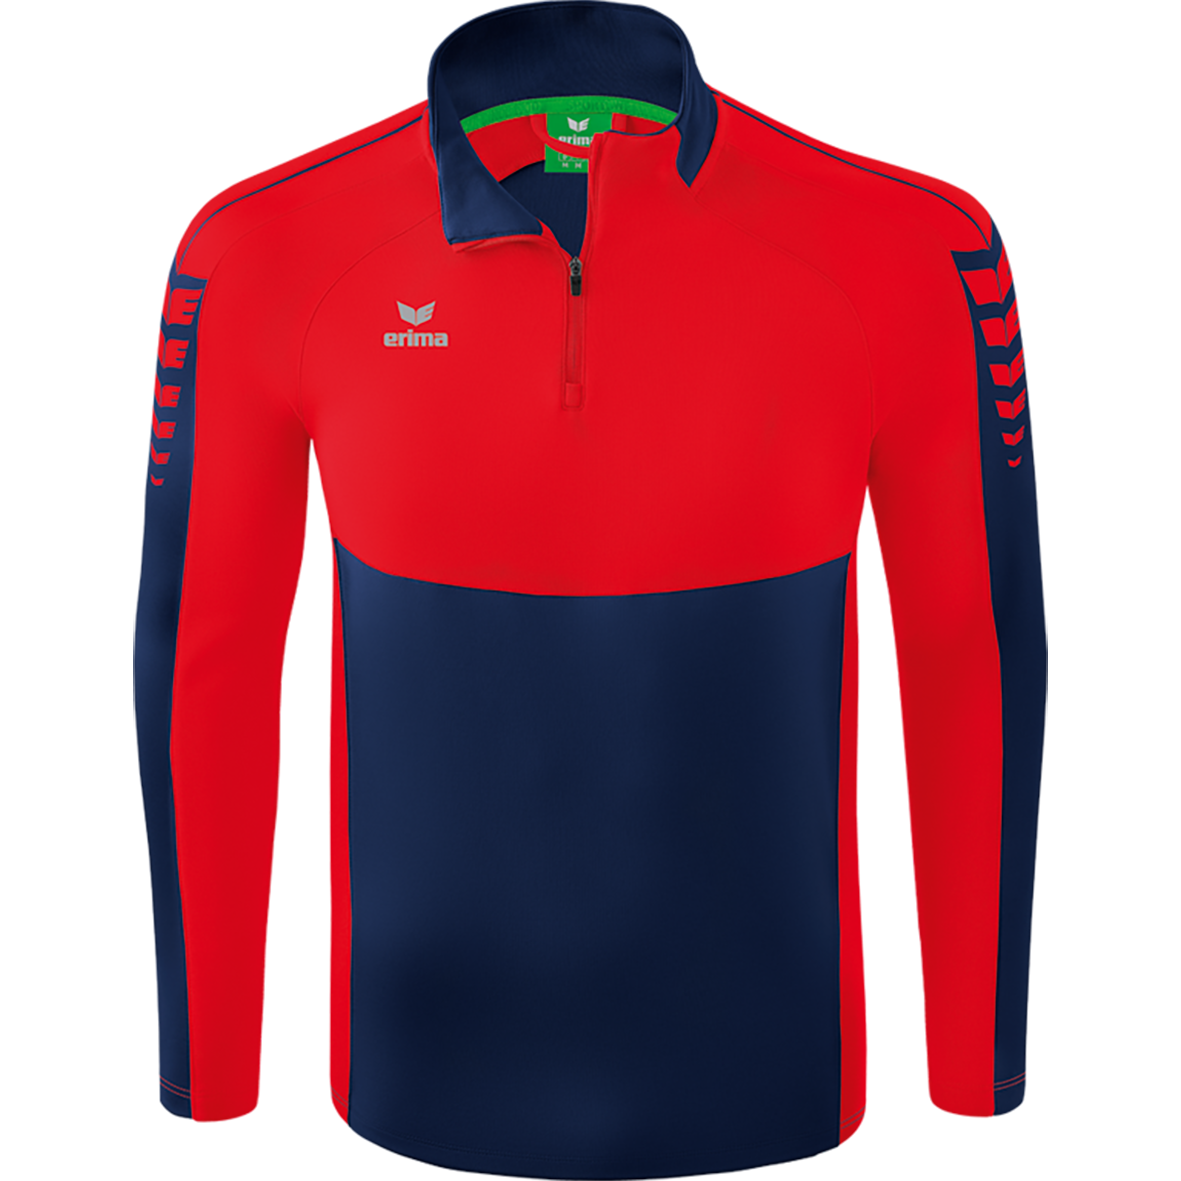 ERIMA SIX WINGS TRAINING TOP, NEW-NAVY-RED KIDS.